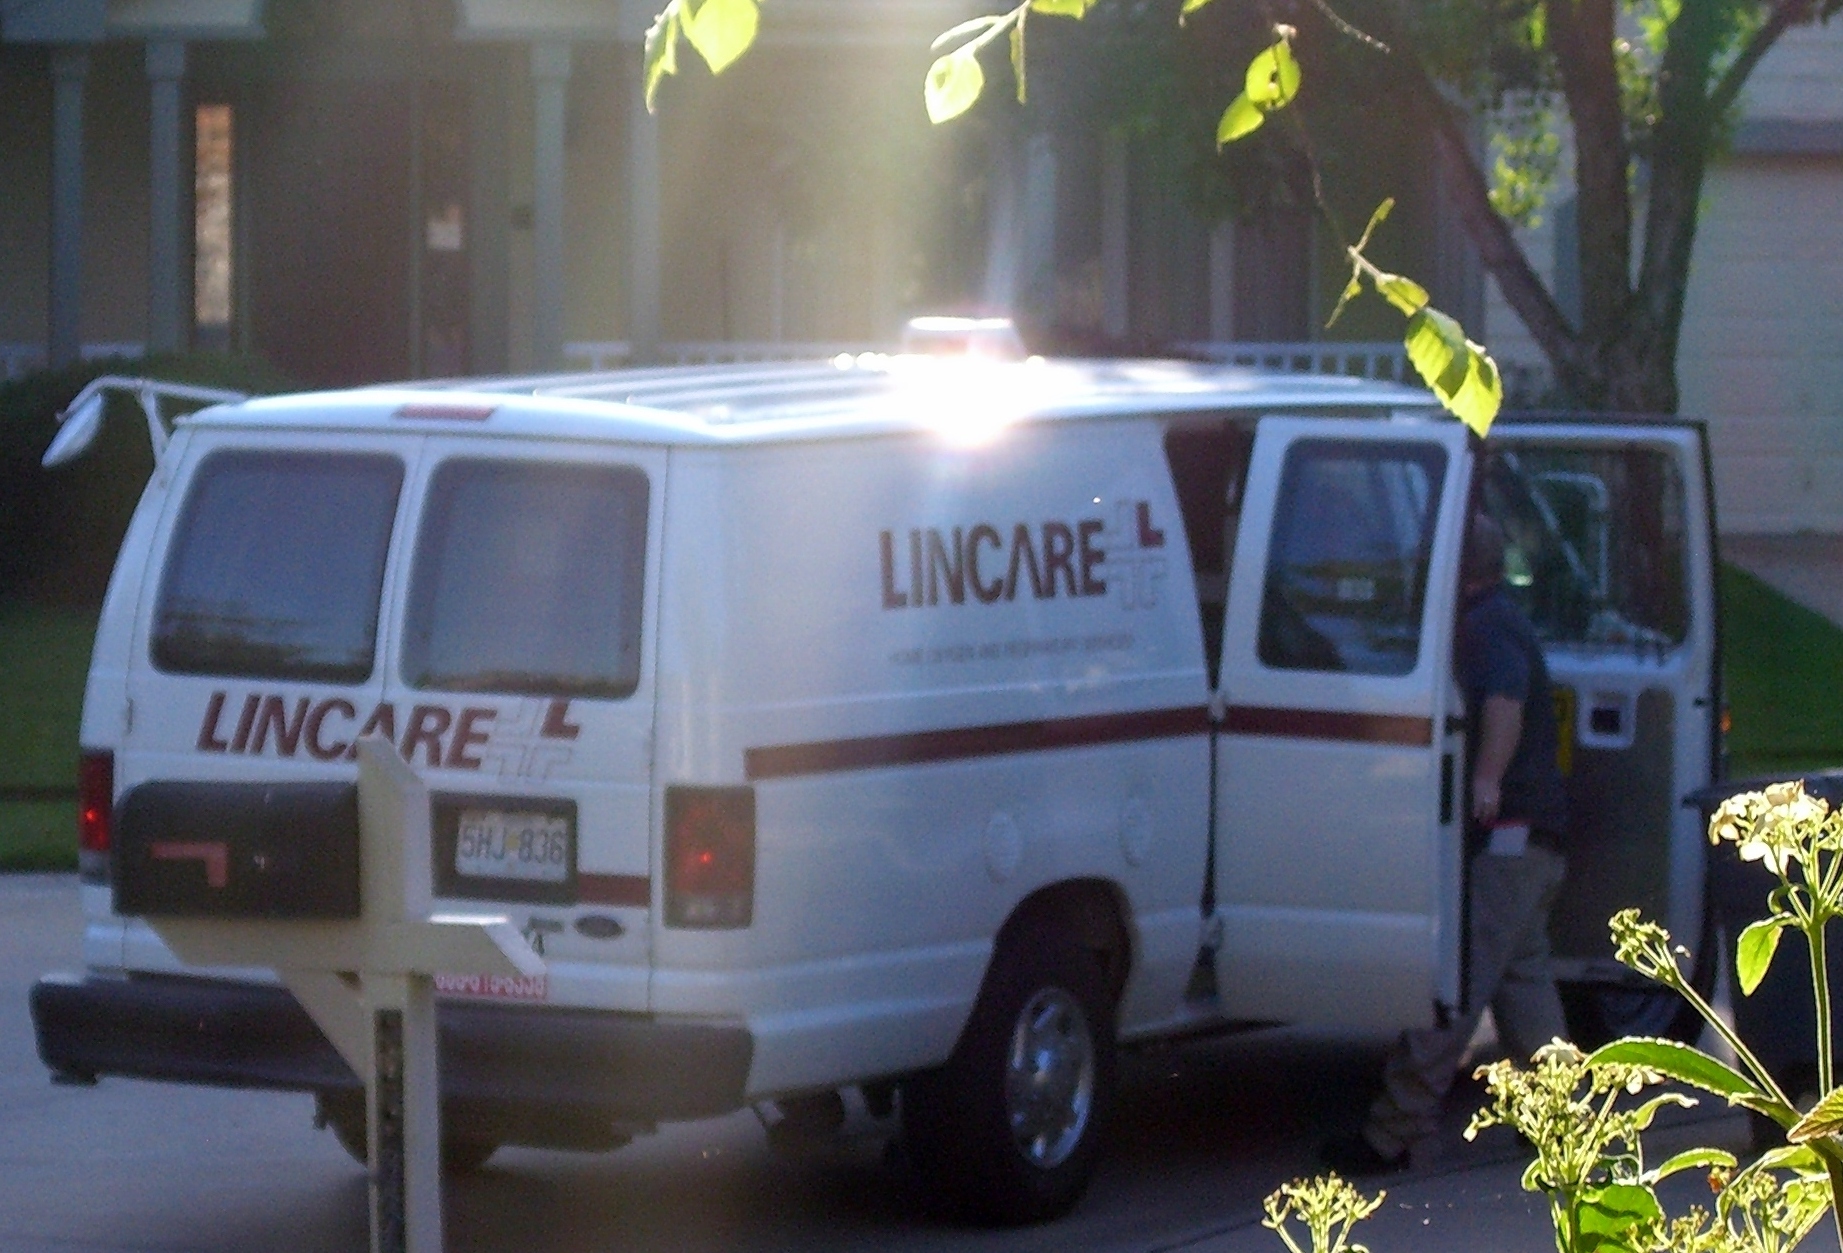 What kind of portable oxygen services does Lincare provide?